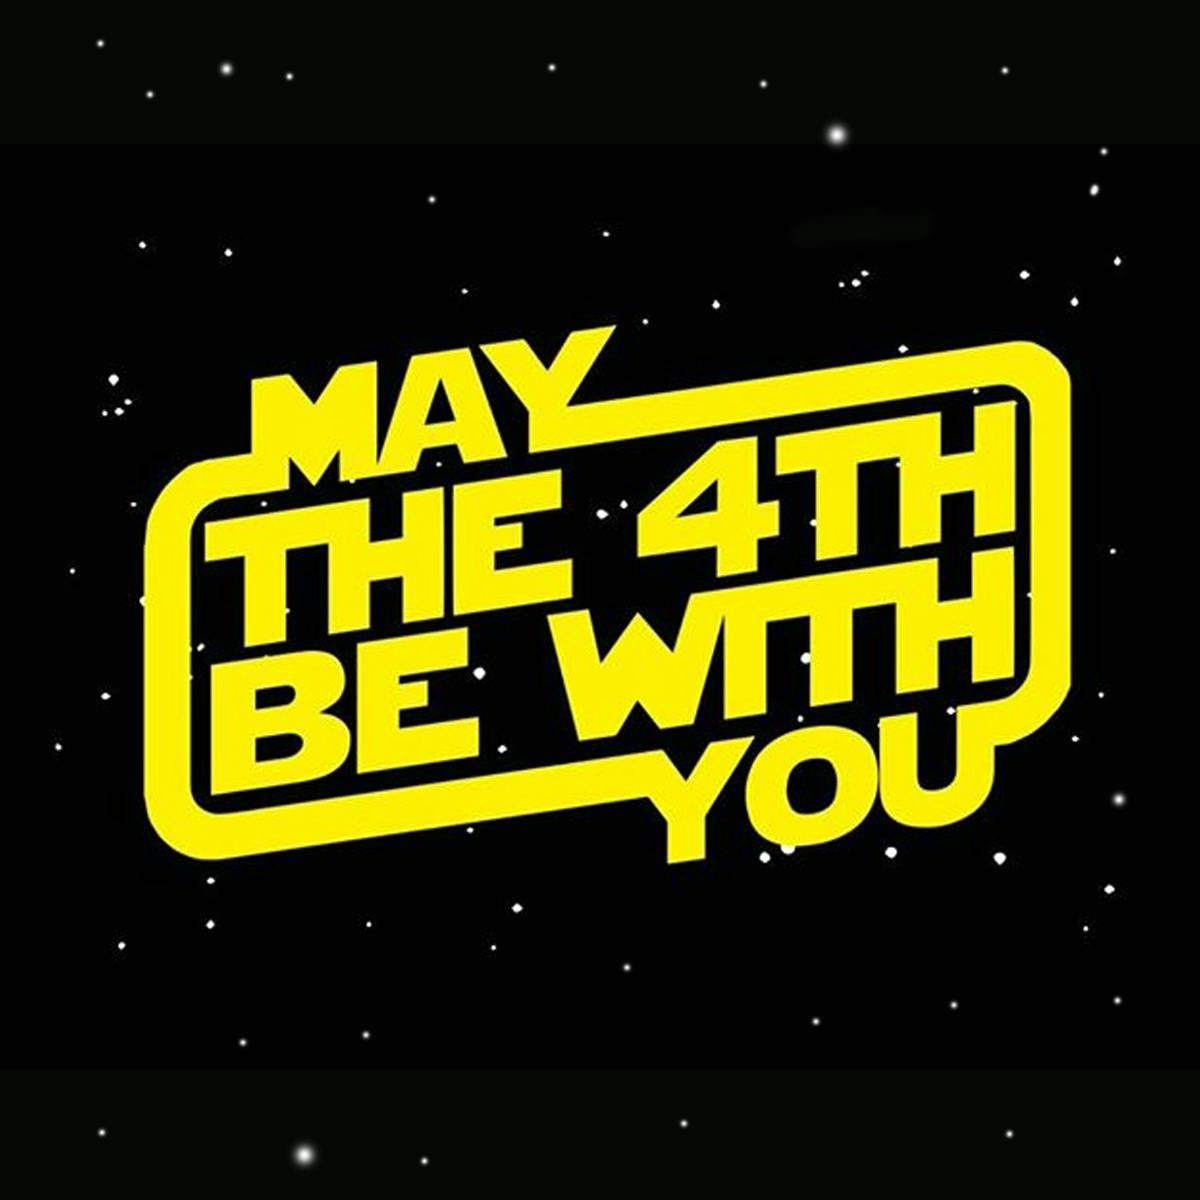 May The Fourth Be With You J Wakefield Brewing